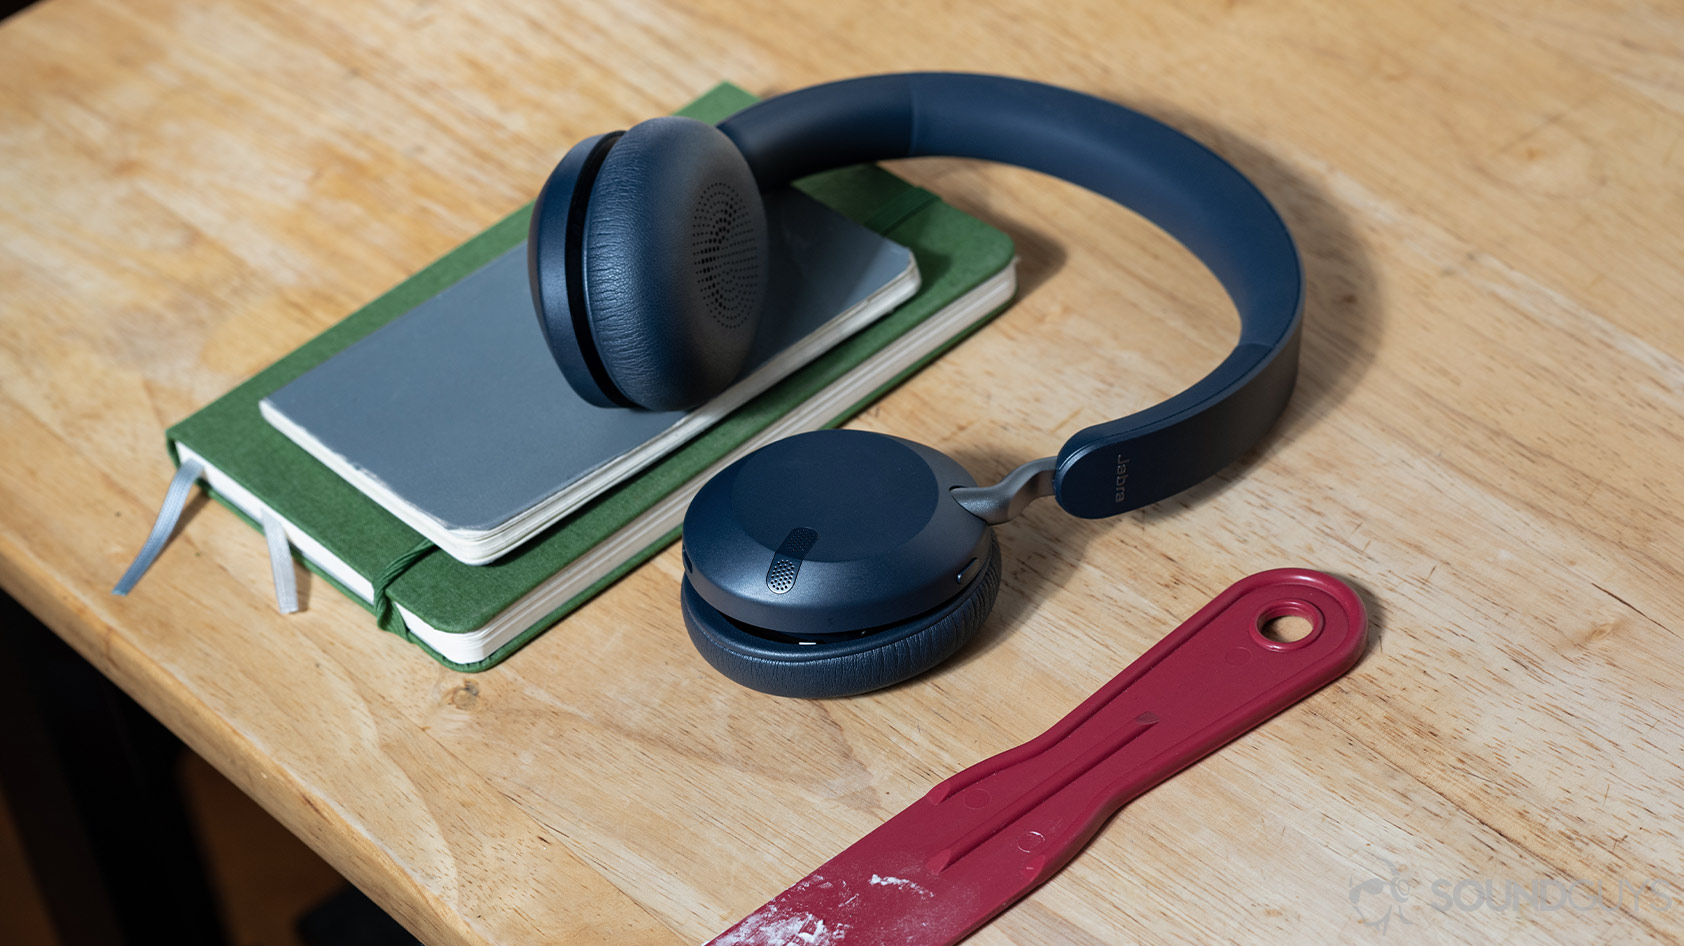 The Jabra Elite 45h on-ear Bluetooth headphones on a wooden surface with journals; the left ear cup is rotated so the interior padding is visible to the viewer.